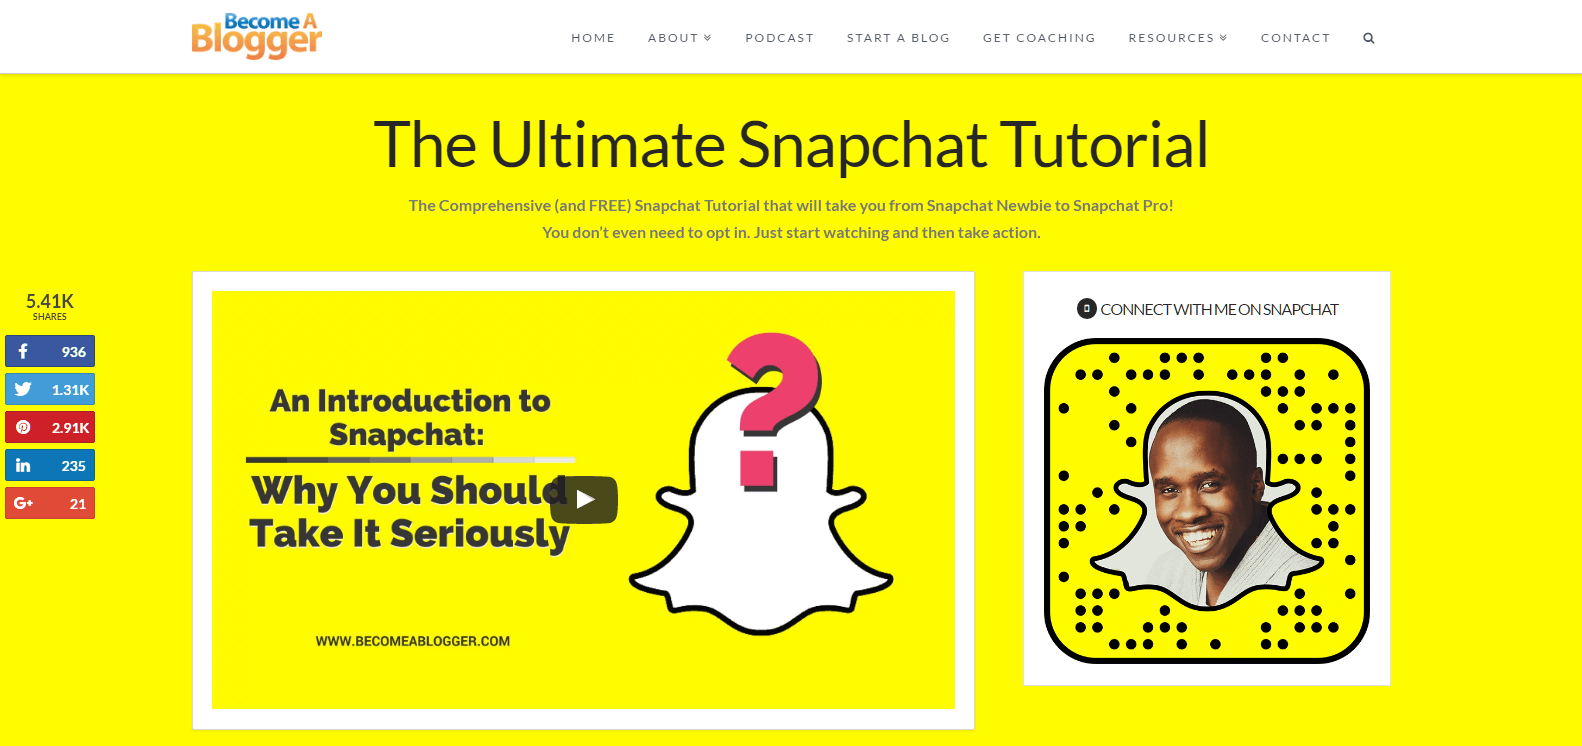 The Ultimate Snapchat Tutorial